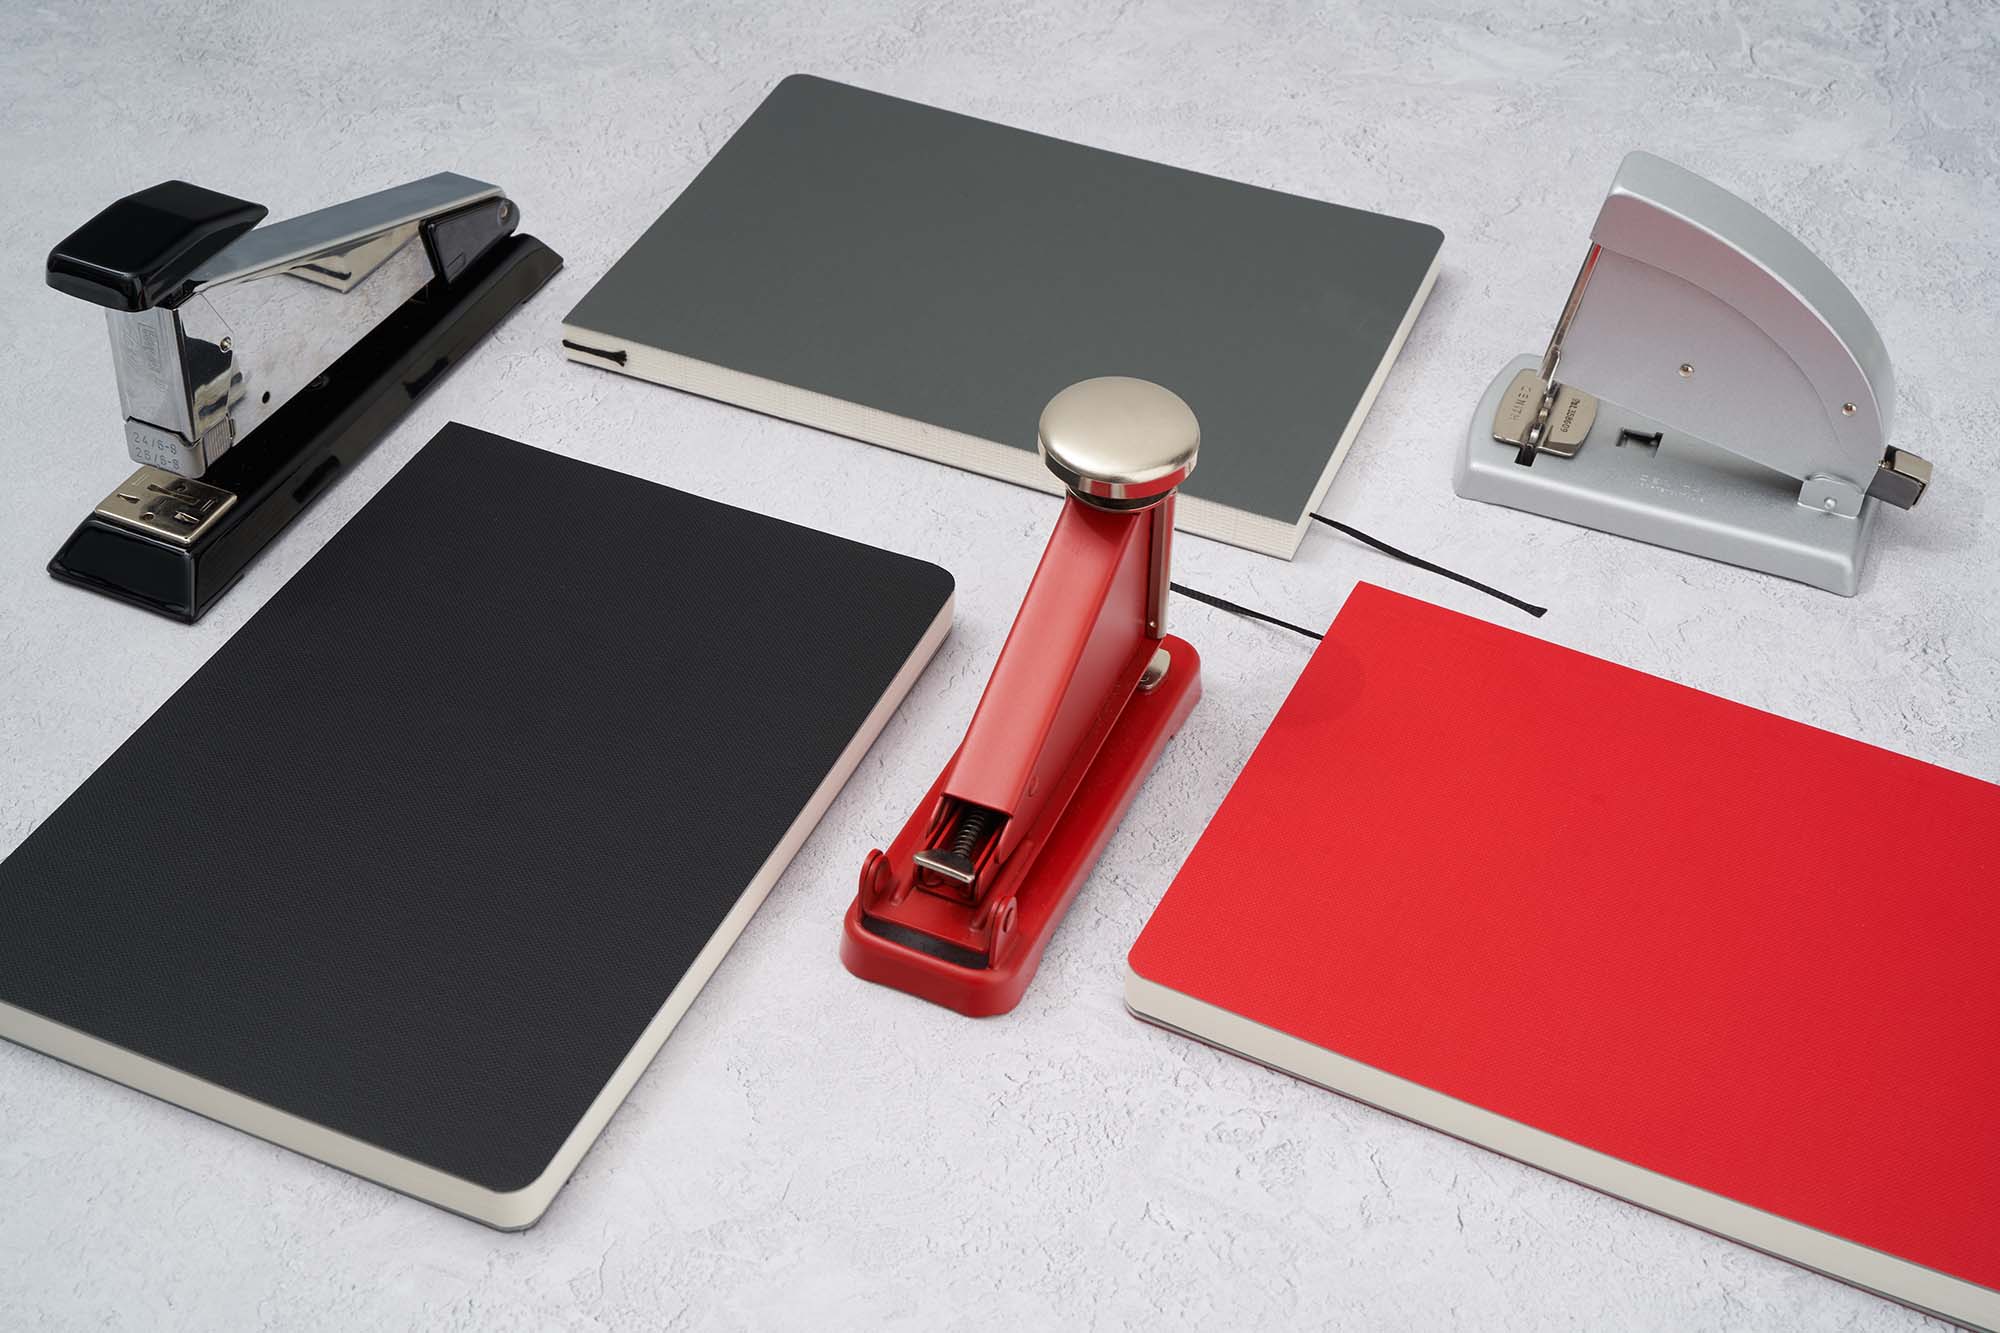 the paper mind Mitsubishi Bank paper notebooks in red gray and black laying flat on a gray background with black red and gray staplers, notebooks for fountain pens